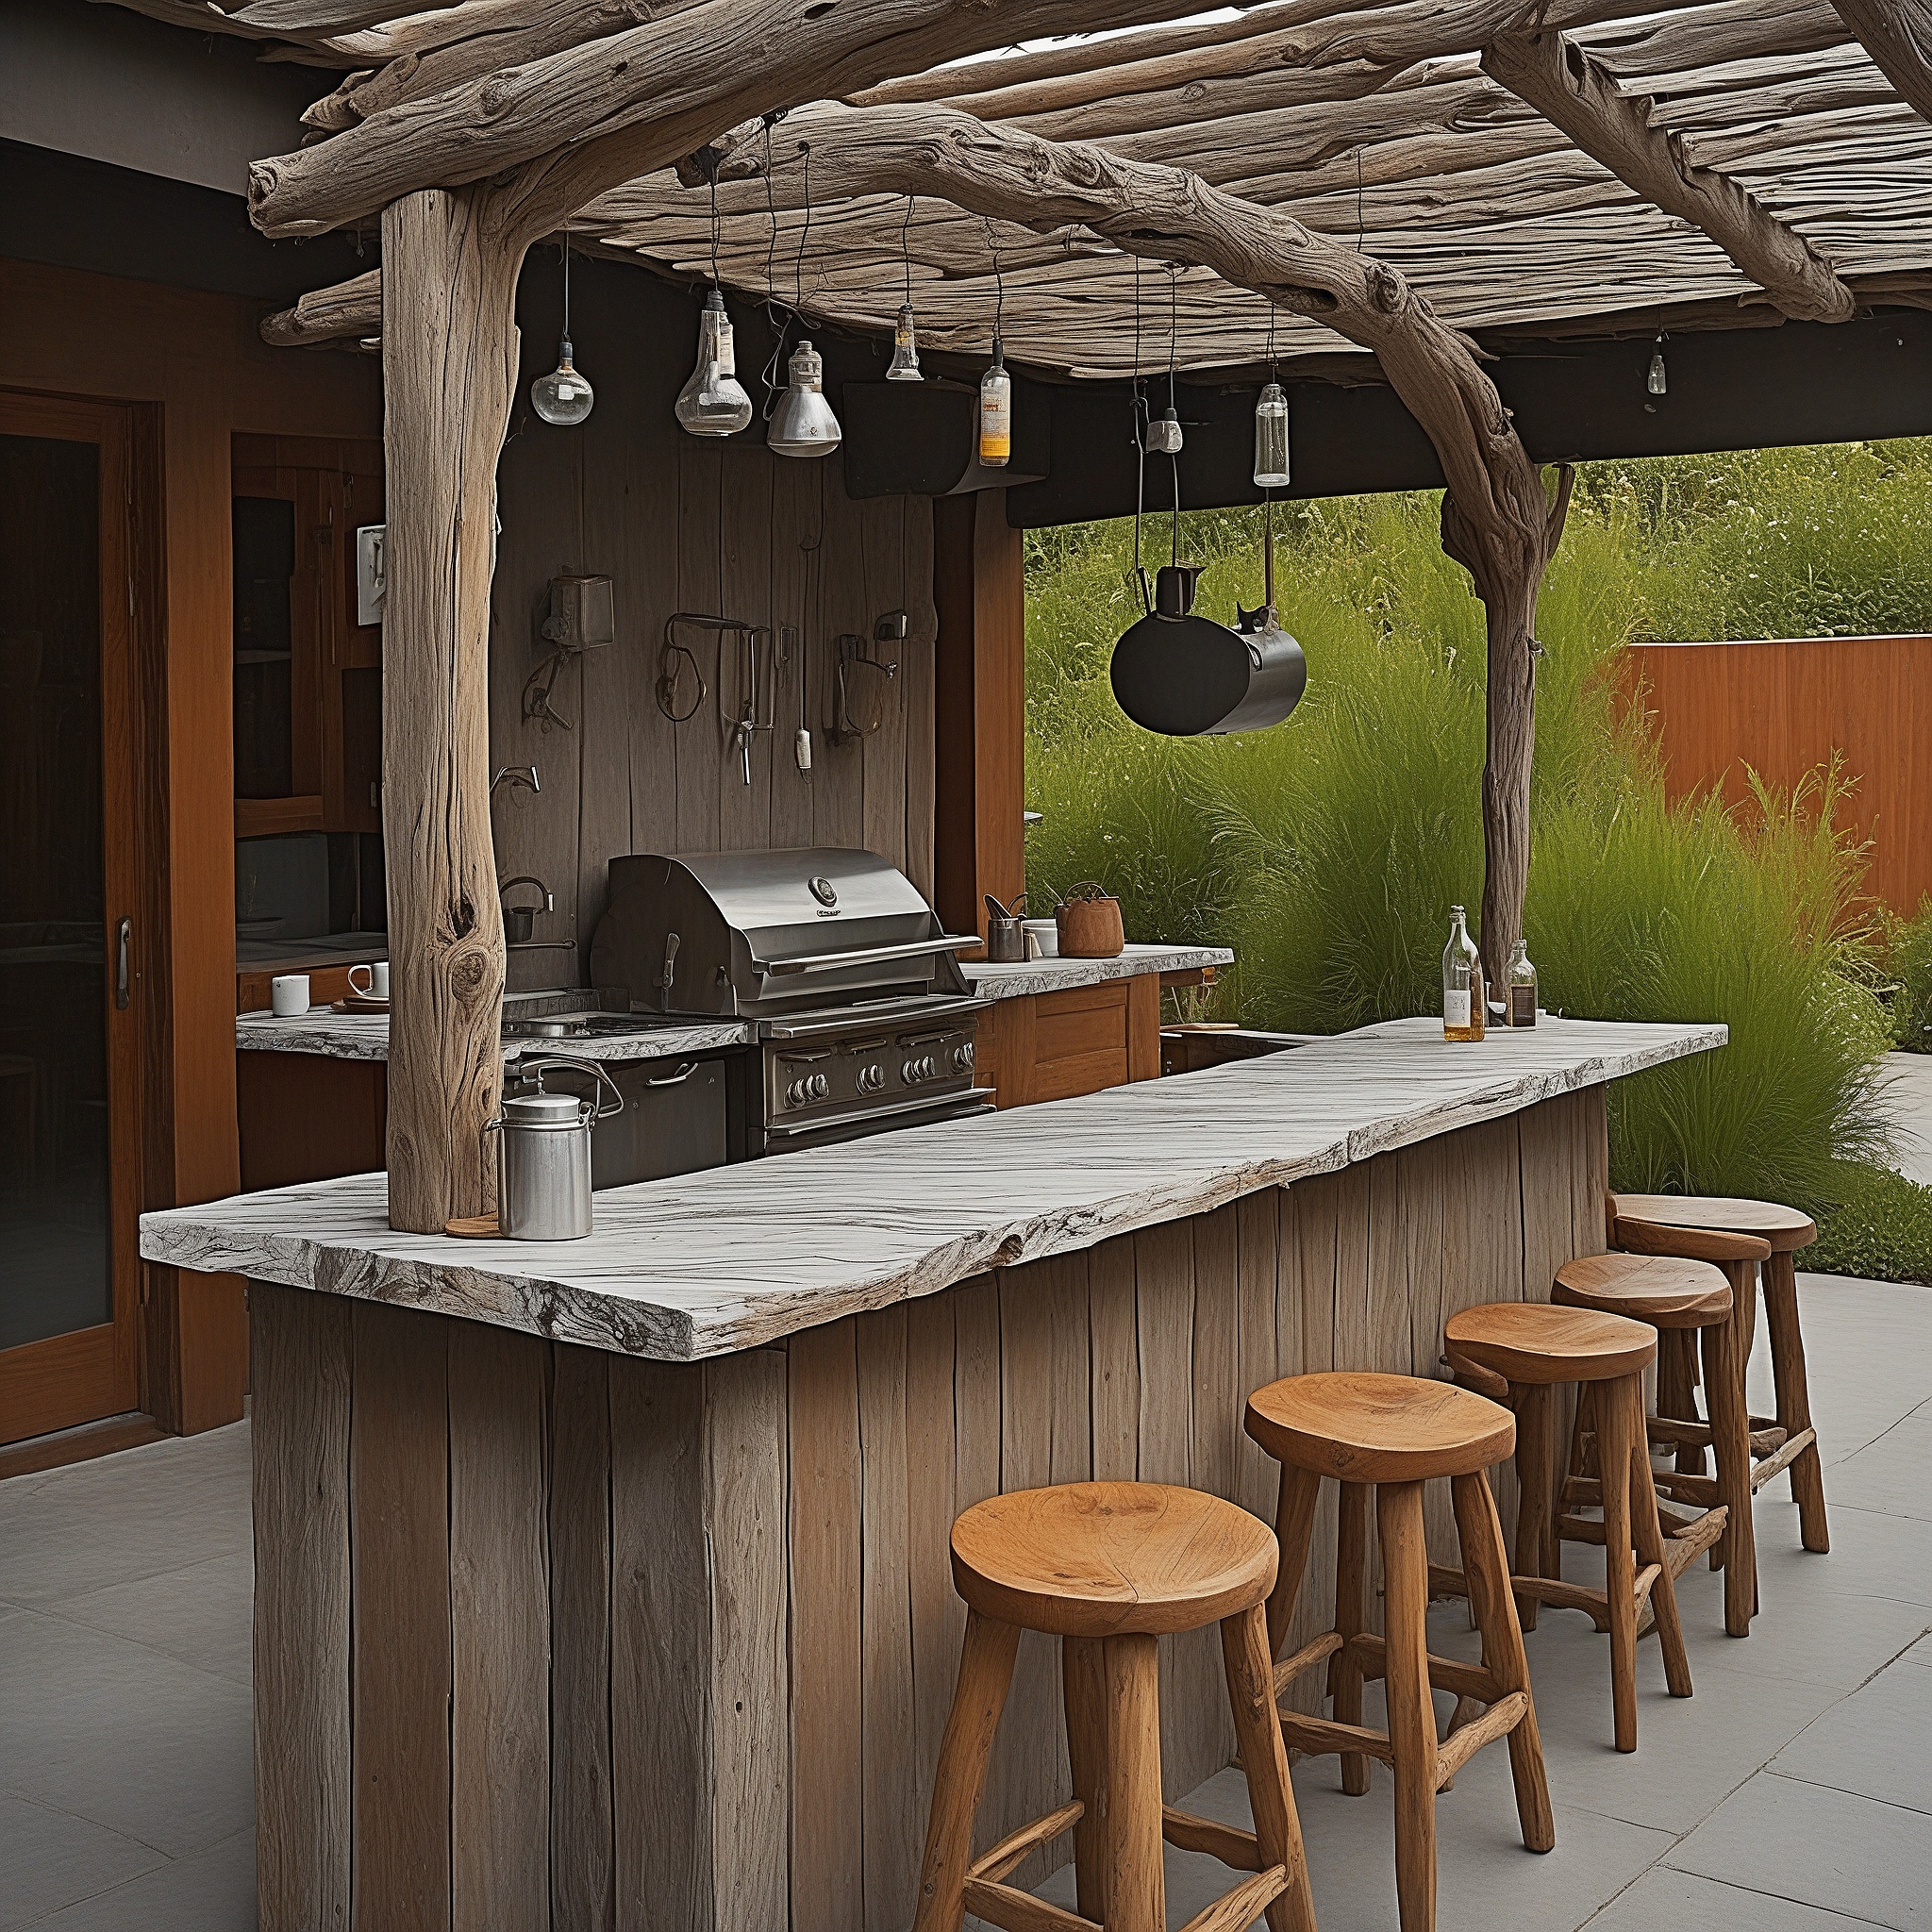 Driftwood Grill Setup With Wooden Countertop